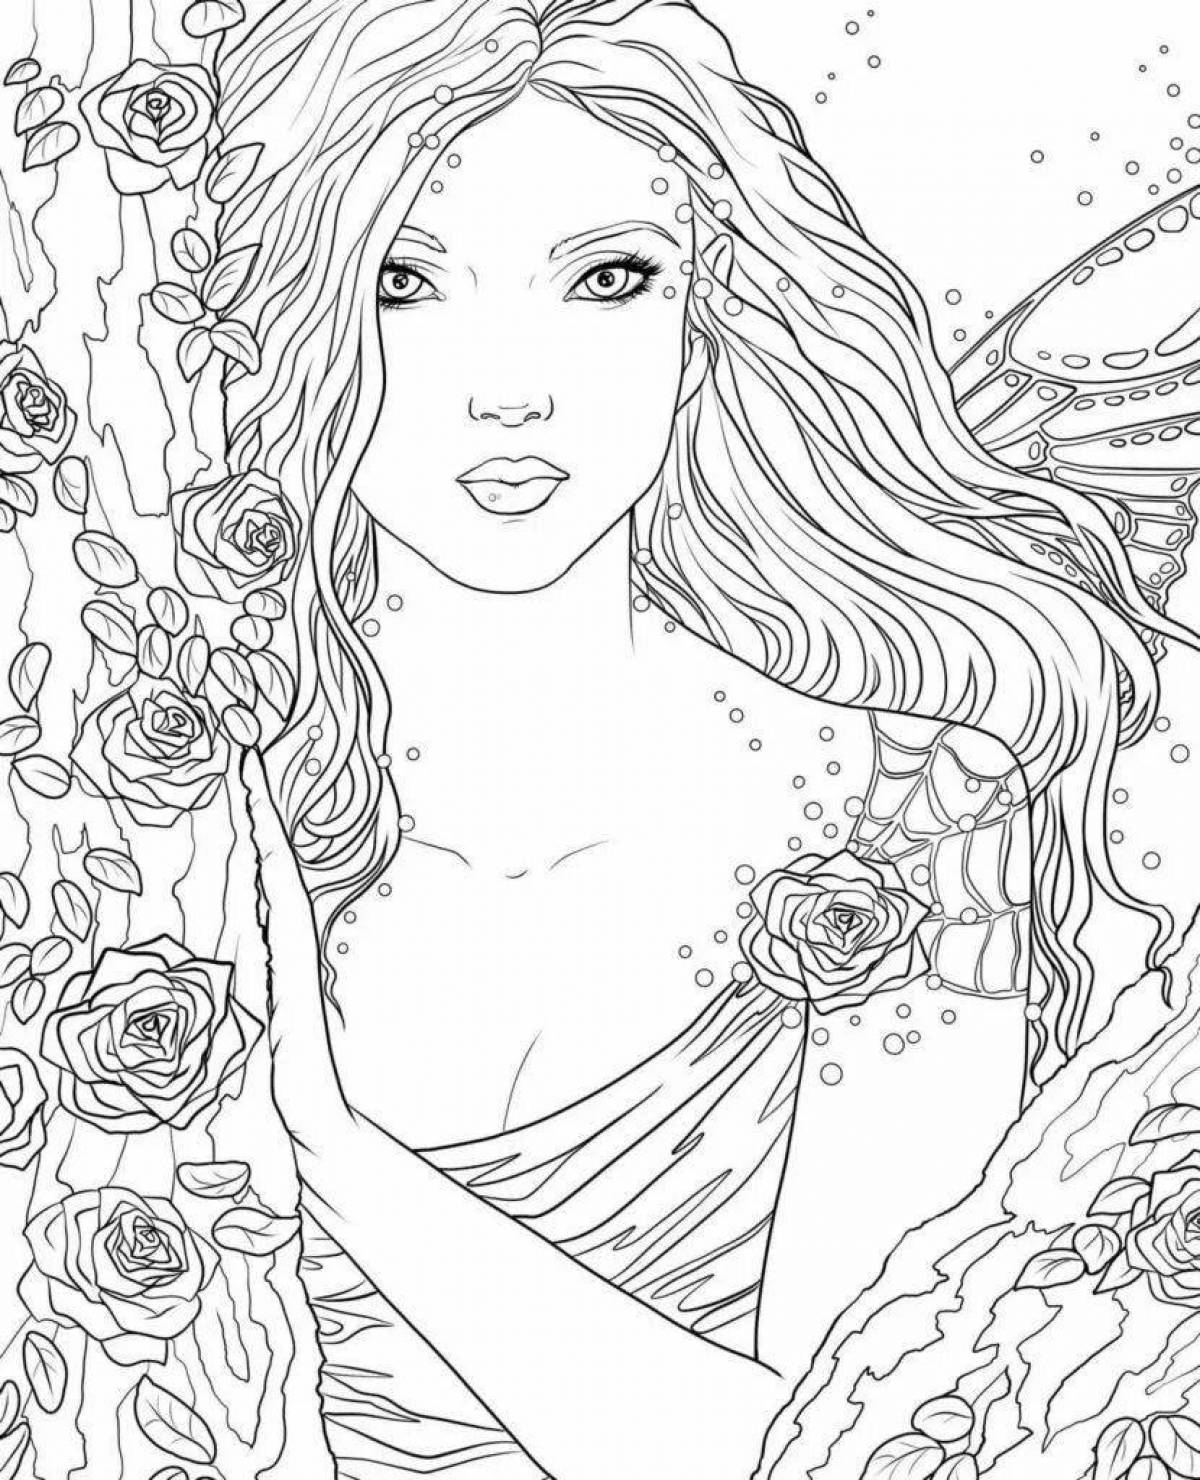 Colorful electronic coloring book for girls